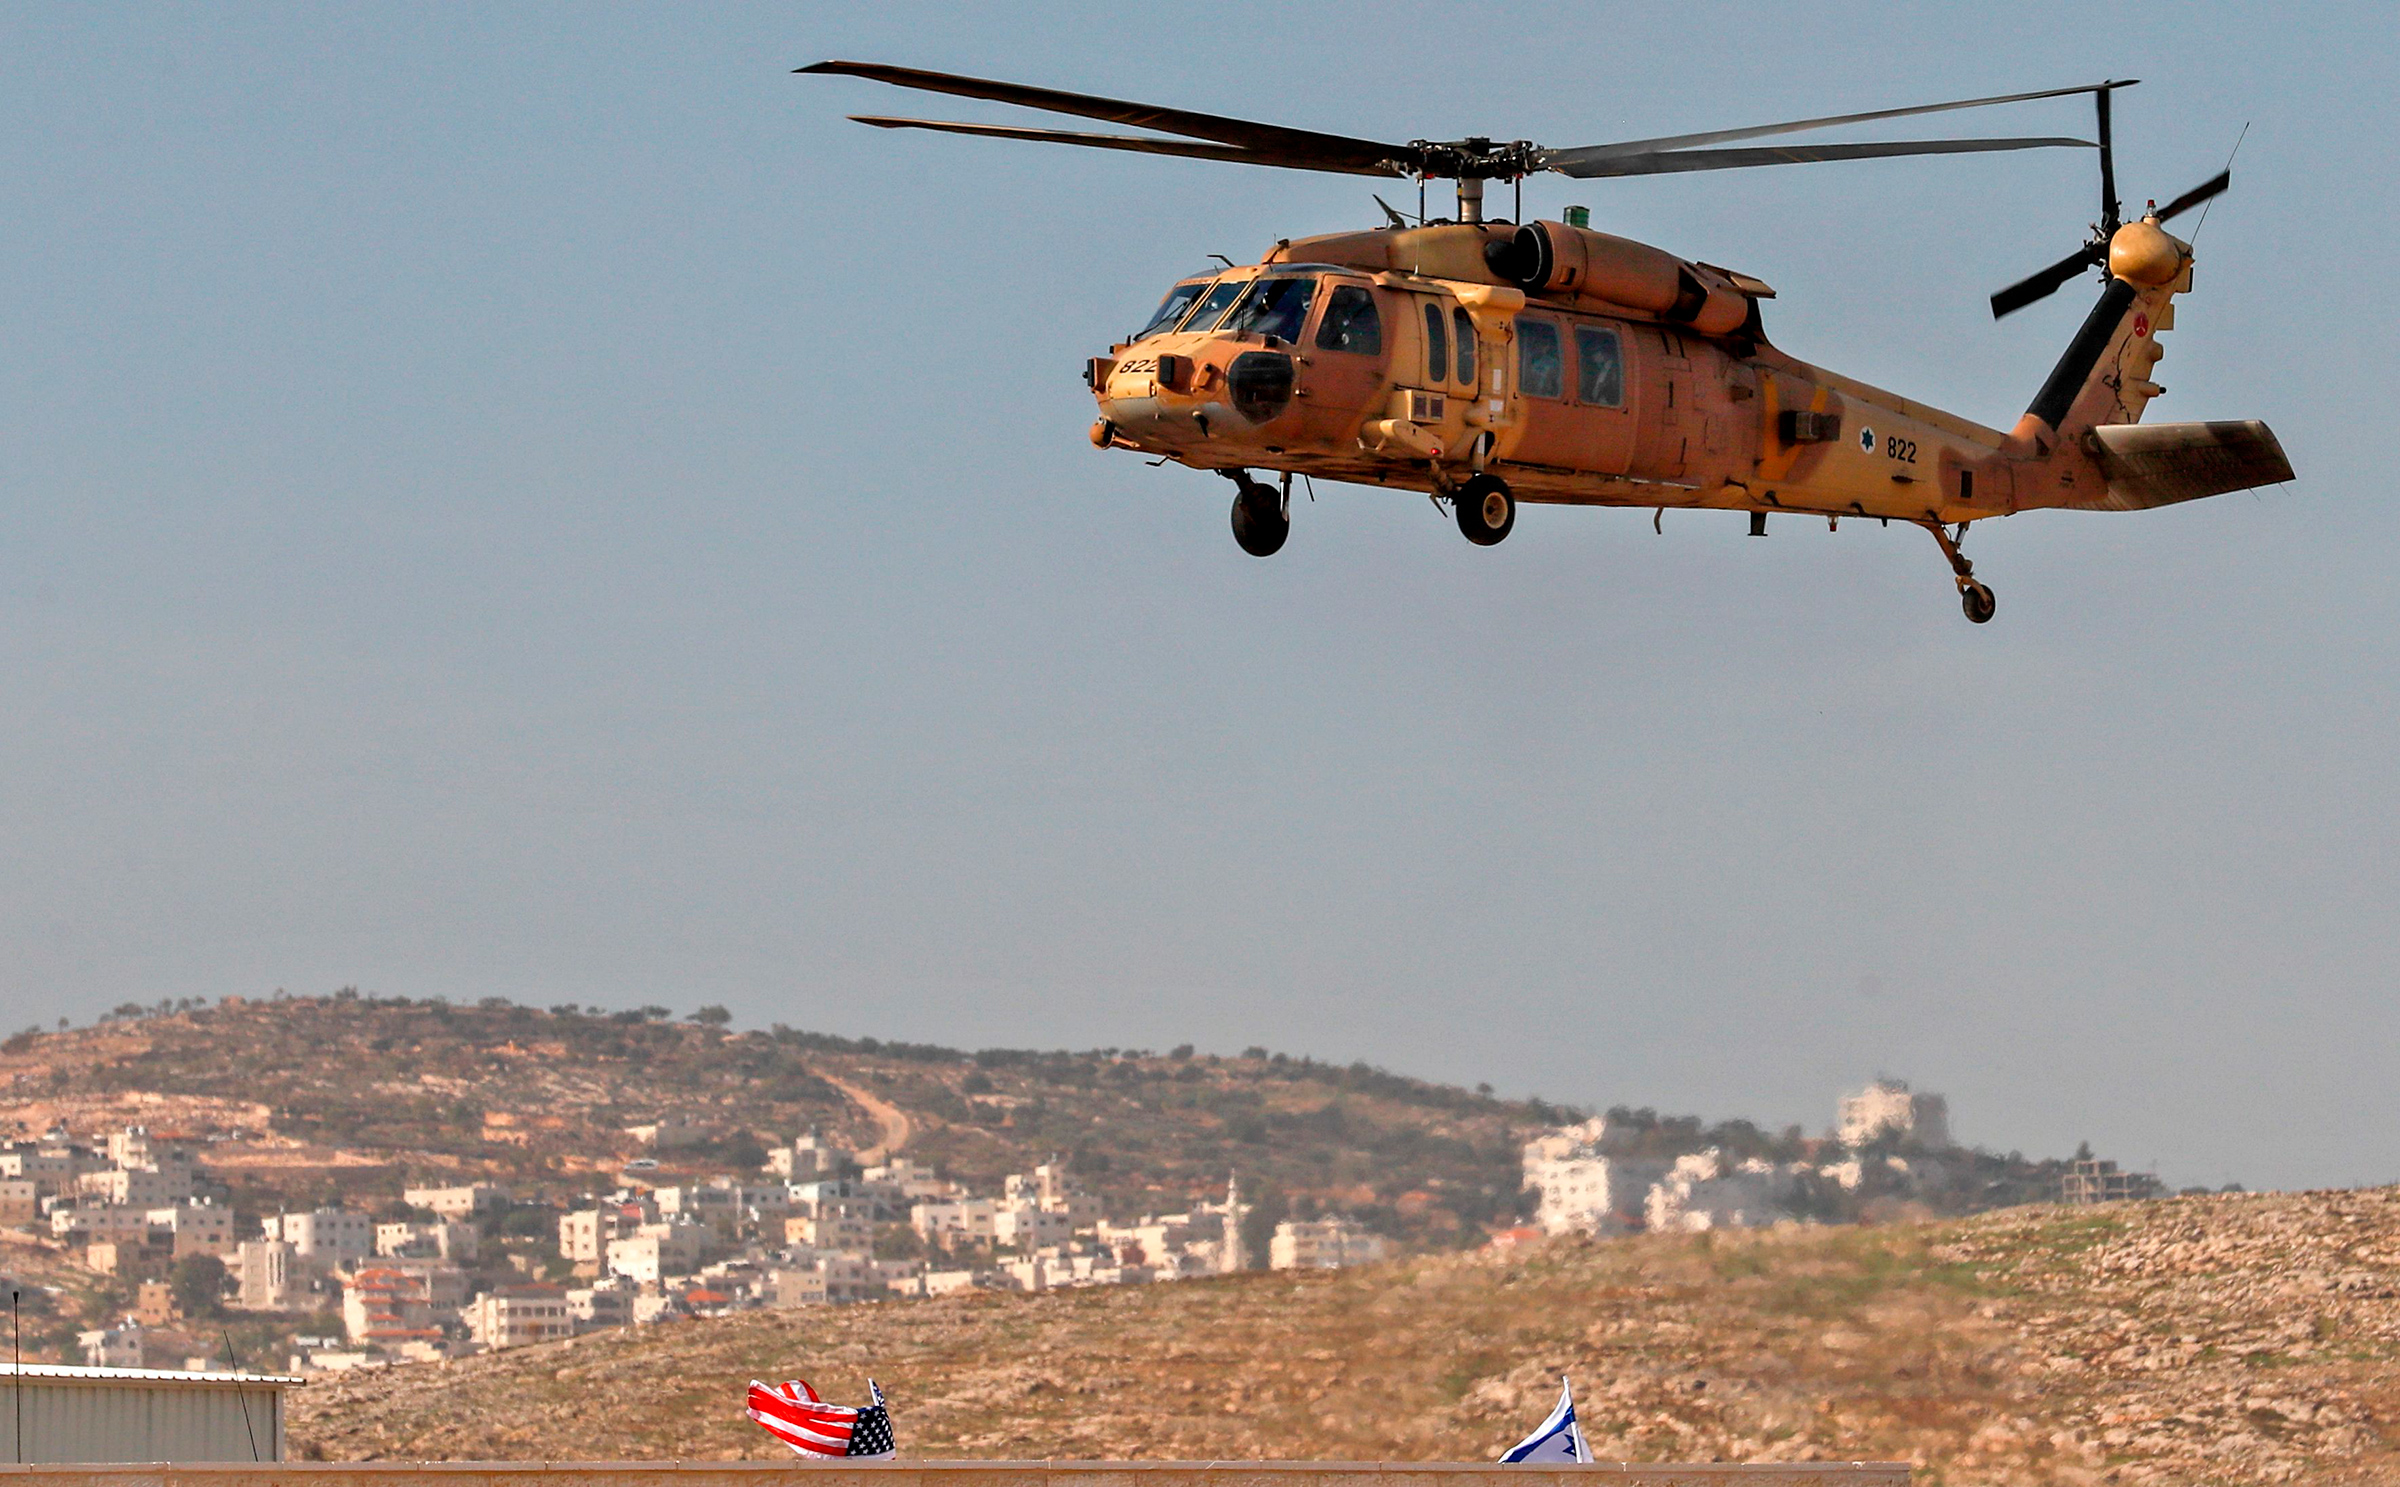 An Israeli airforce helicopter carrying US Secretary of State Mike Pompeo hovers over the settlers industrial park of Sha'ar Binyamin, with the Palestinian village of Burqa in the background, in the occupied West Bank on Nov. 19 (Ahmad Gharabli—AFP/Getty Images)